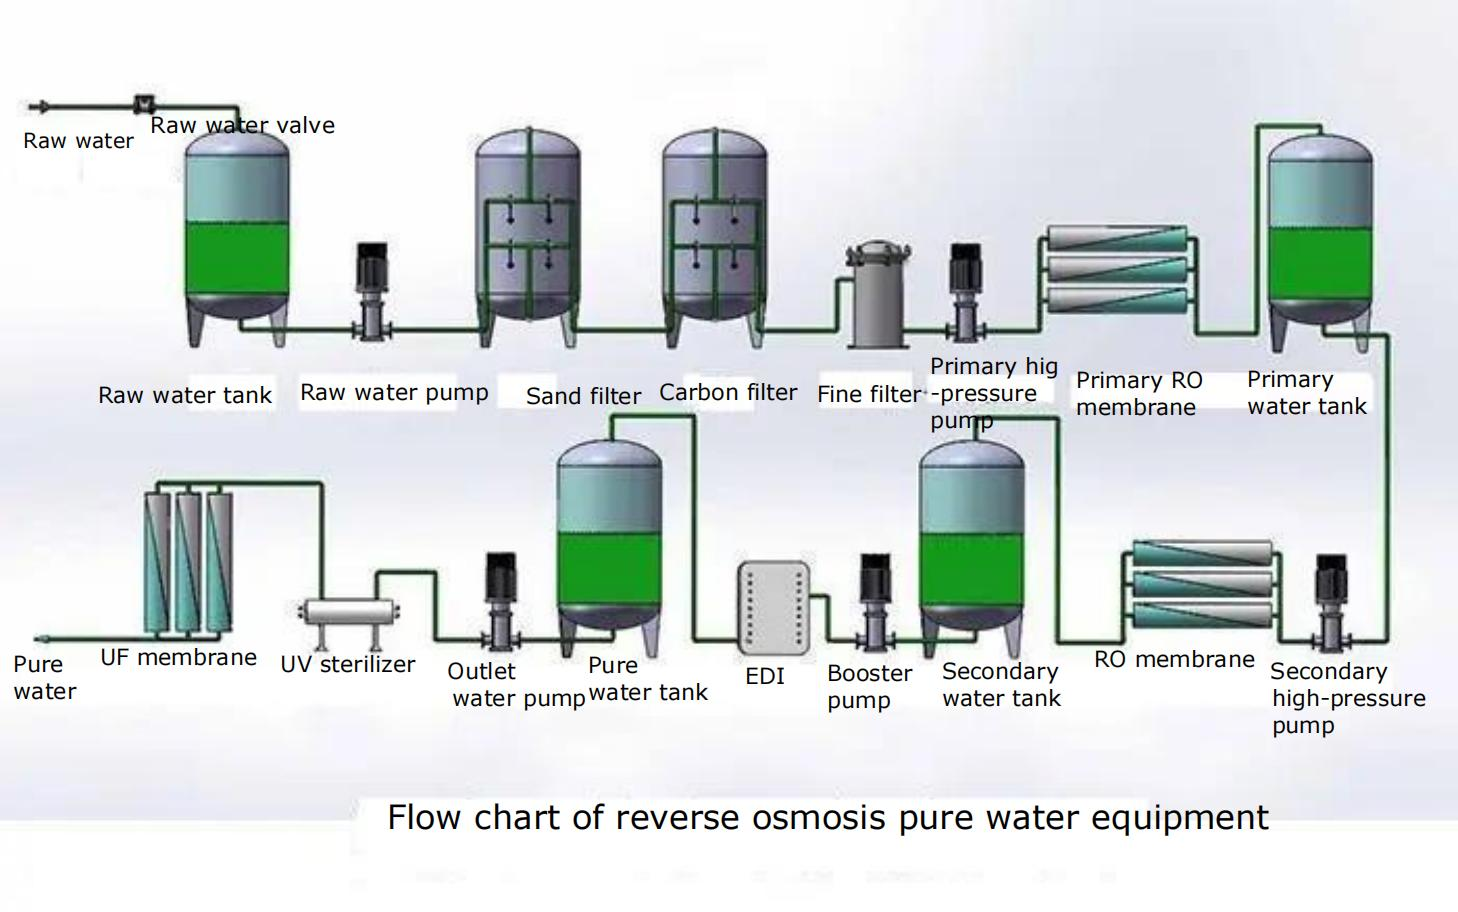 Technological process introduction to reverse osmosis equipment